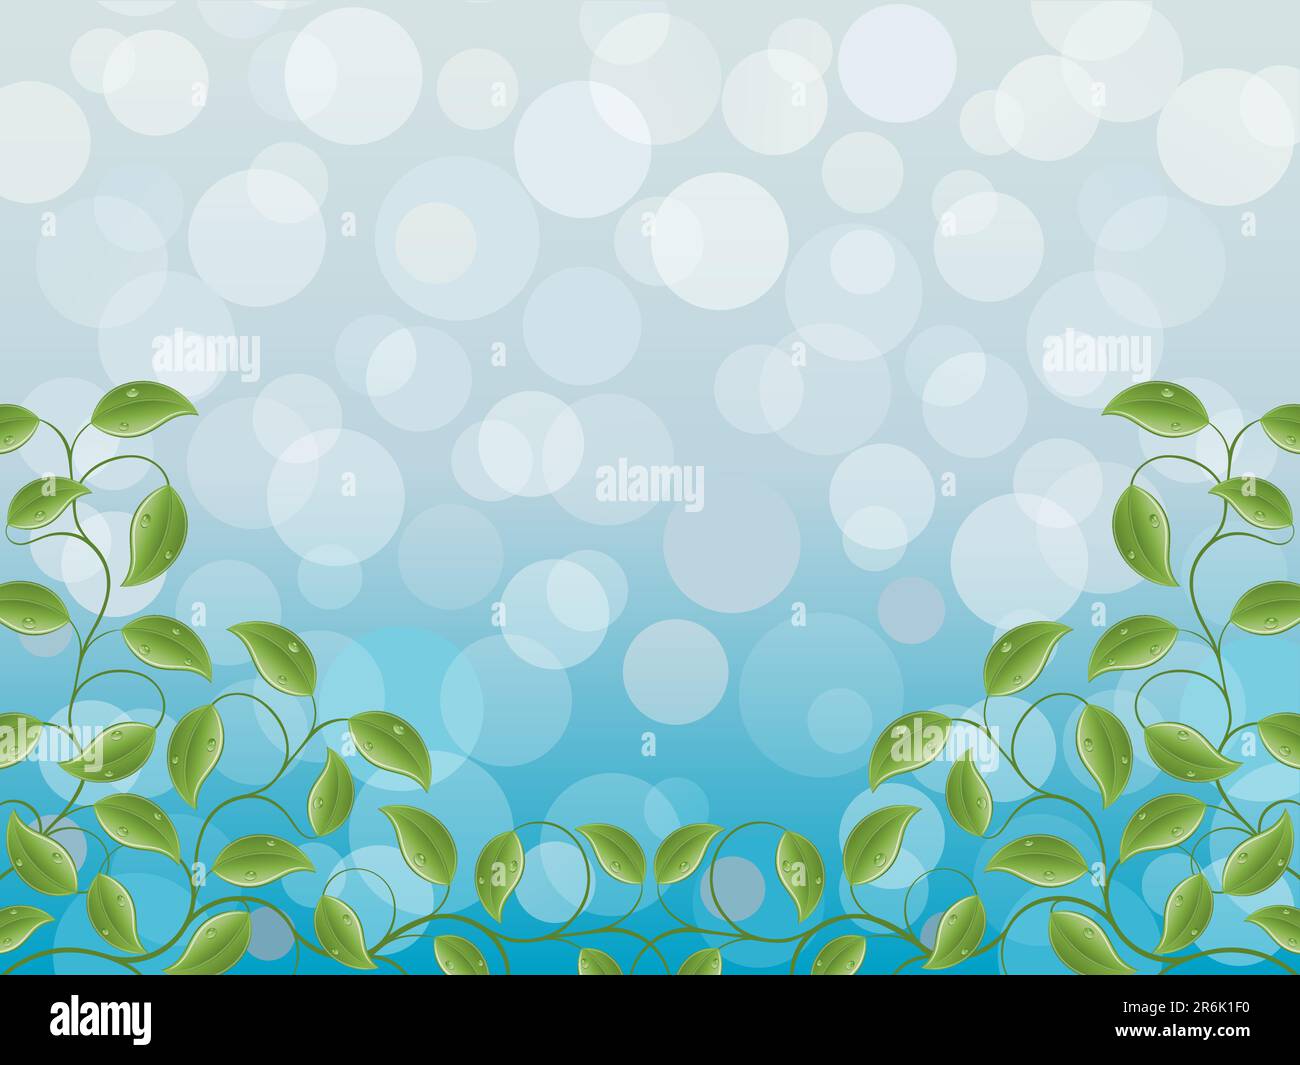 Abstract floral background. Vector illustration. Stock Vector